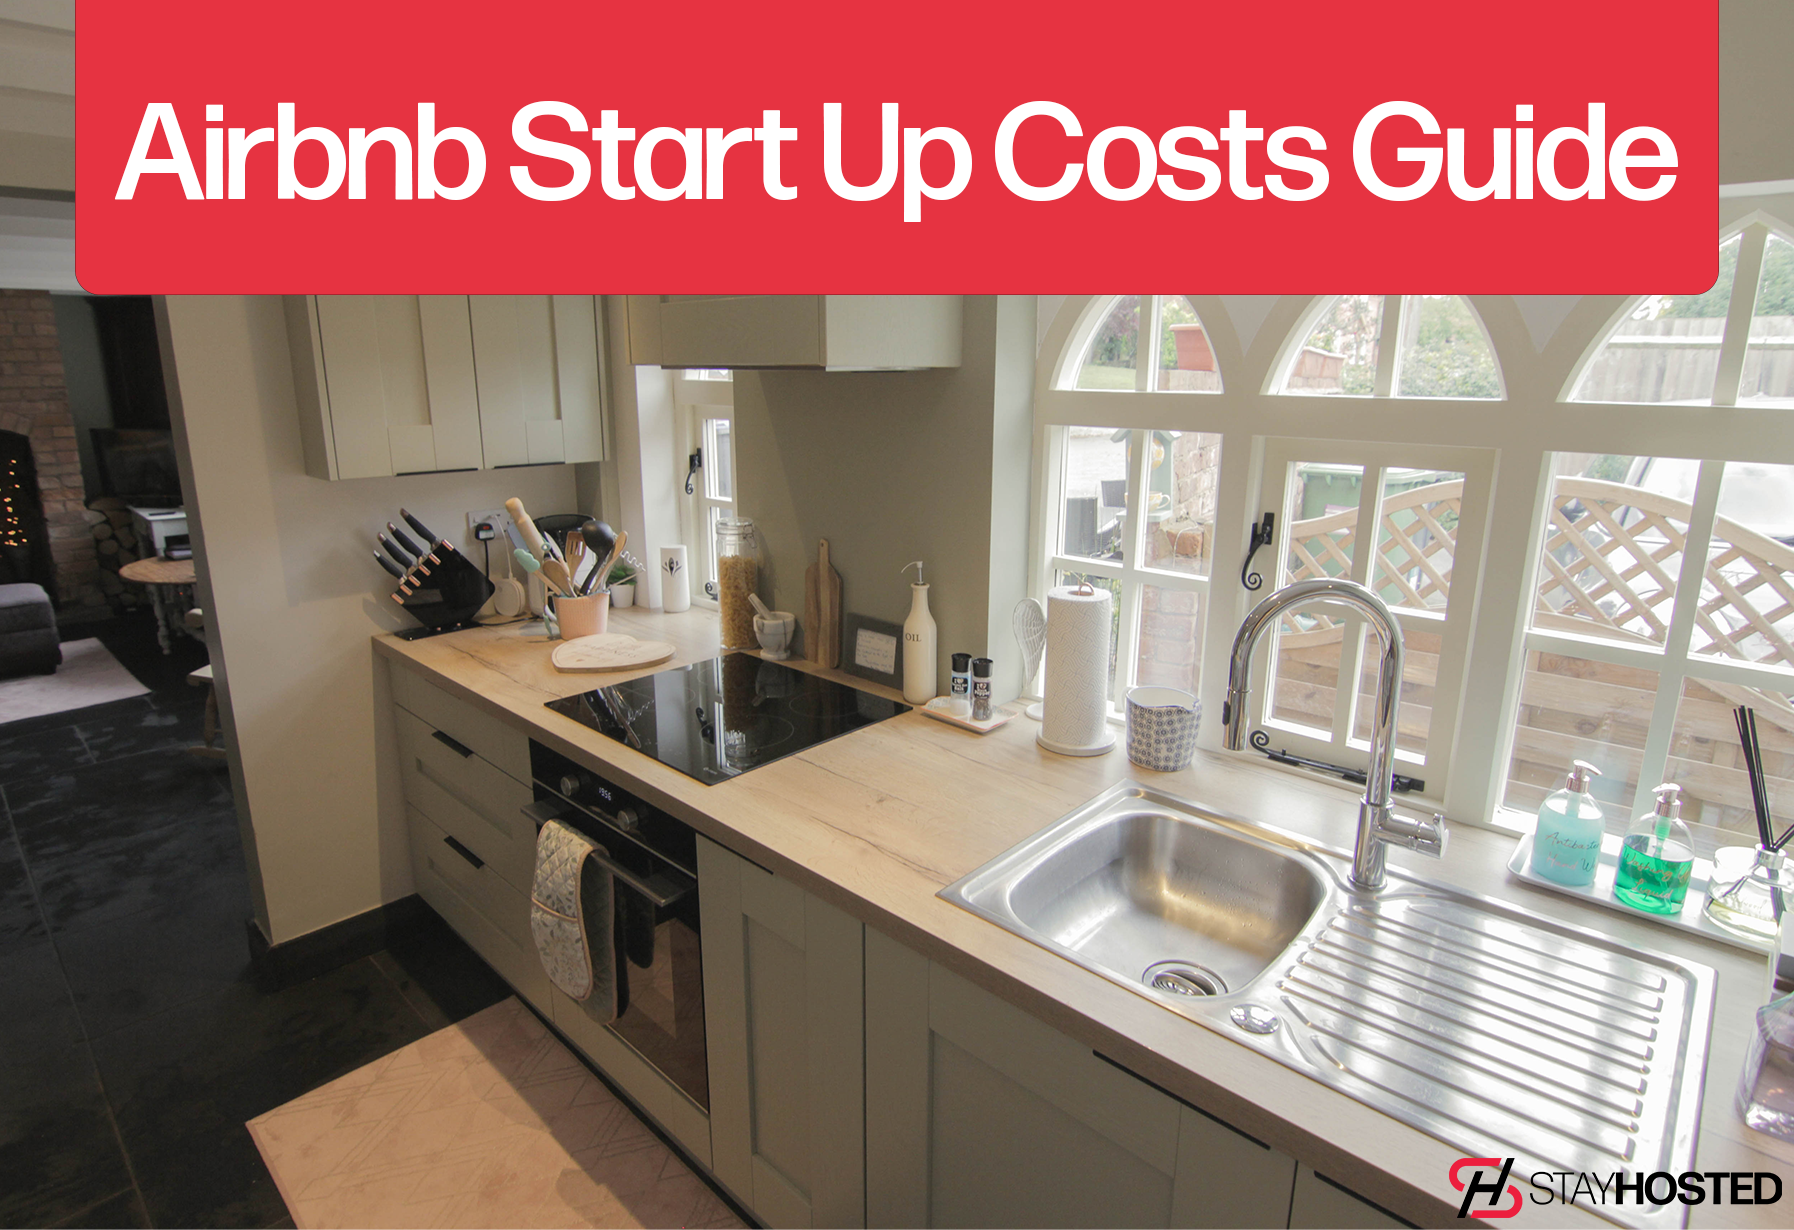 Airbnb Start Up Costs